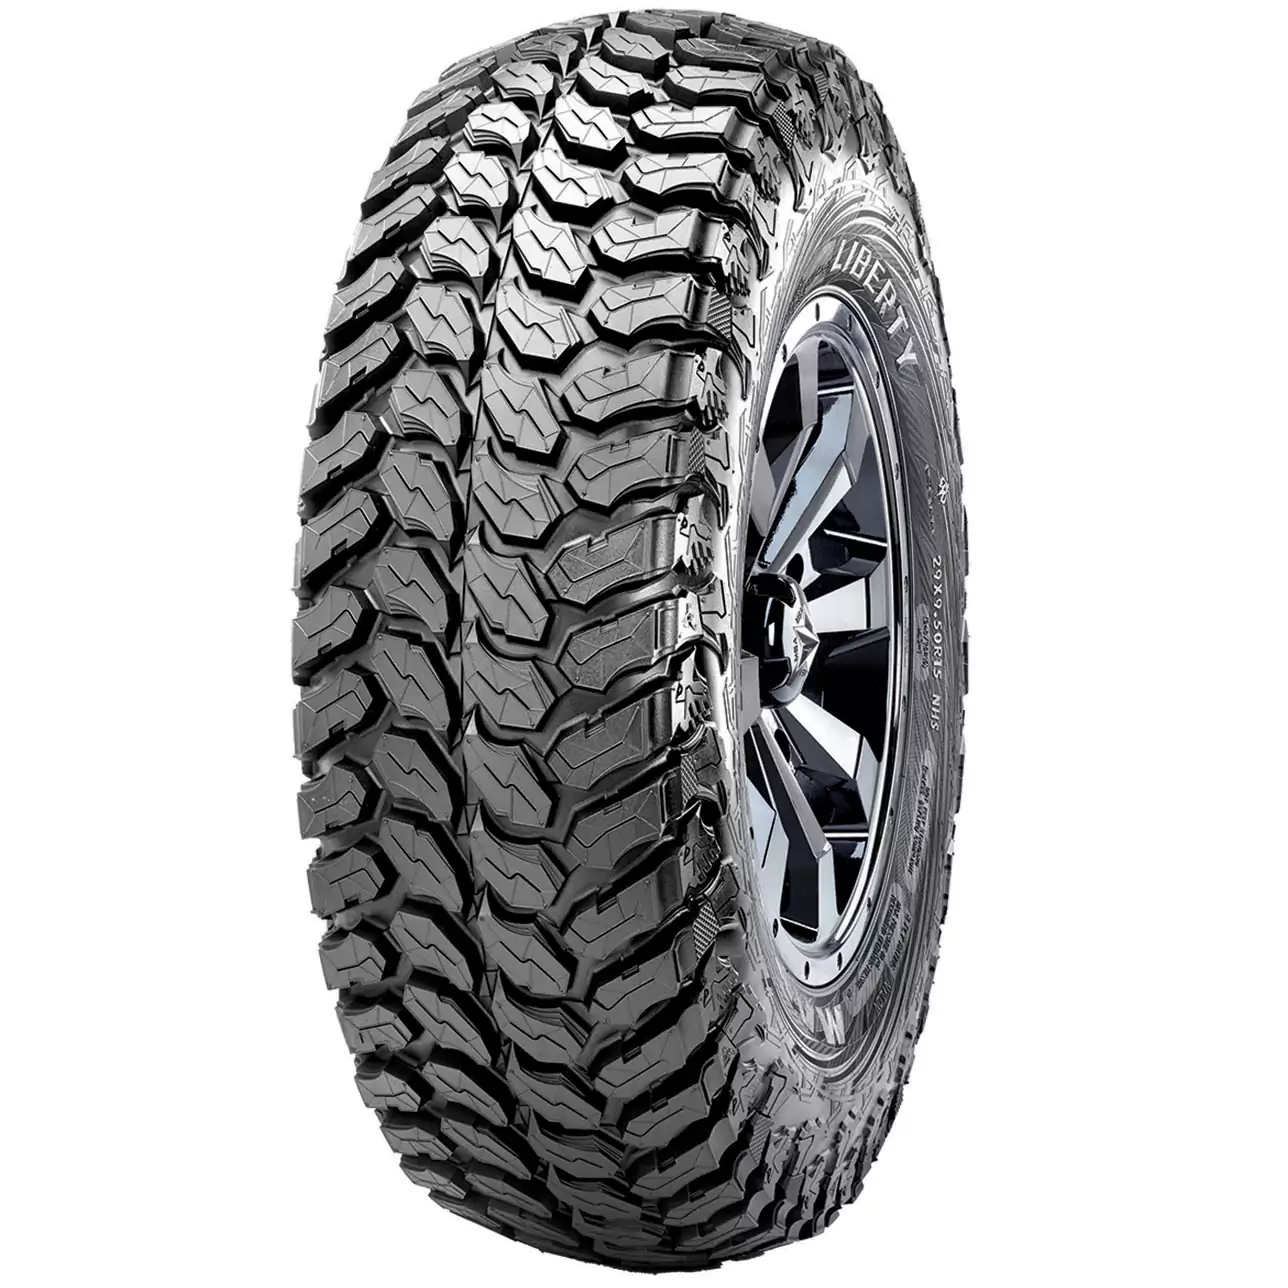 ML5 Tire Size 32x10R15 MAXXIS Rampage 